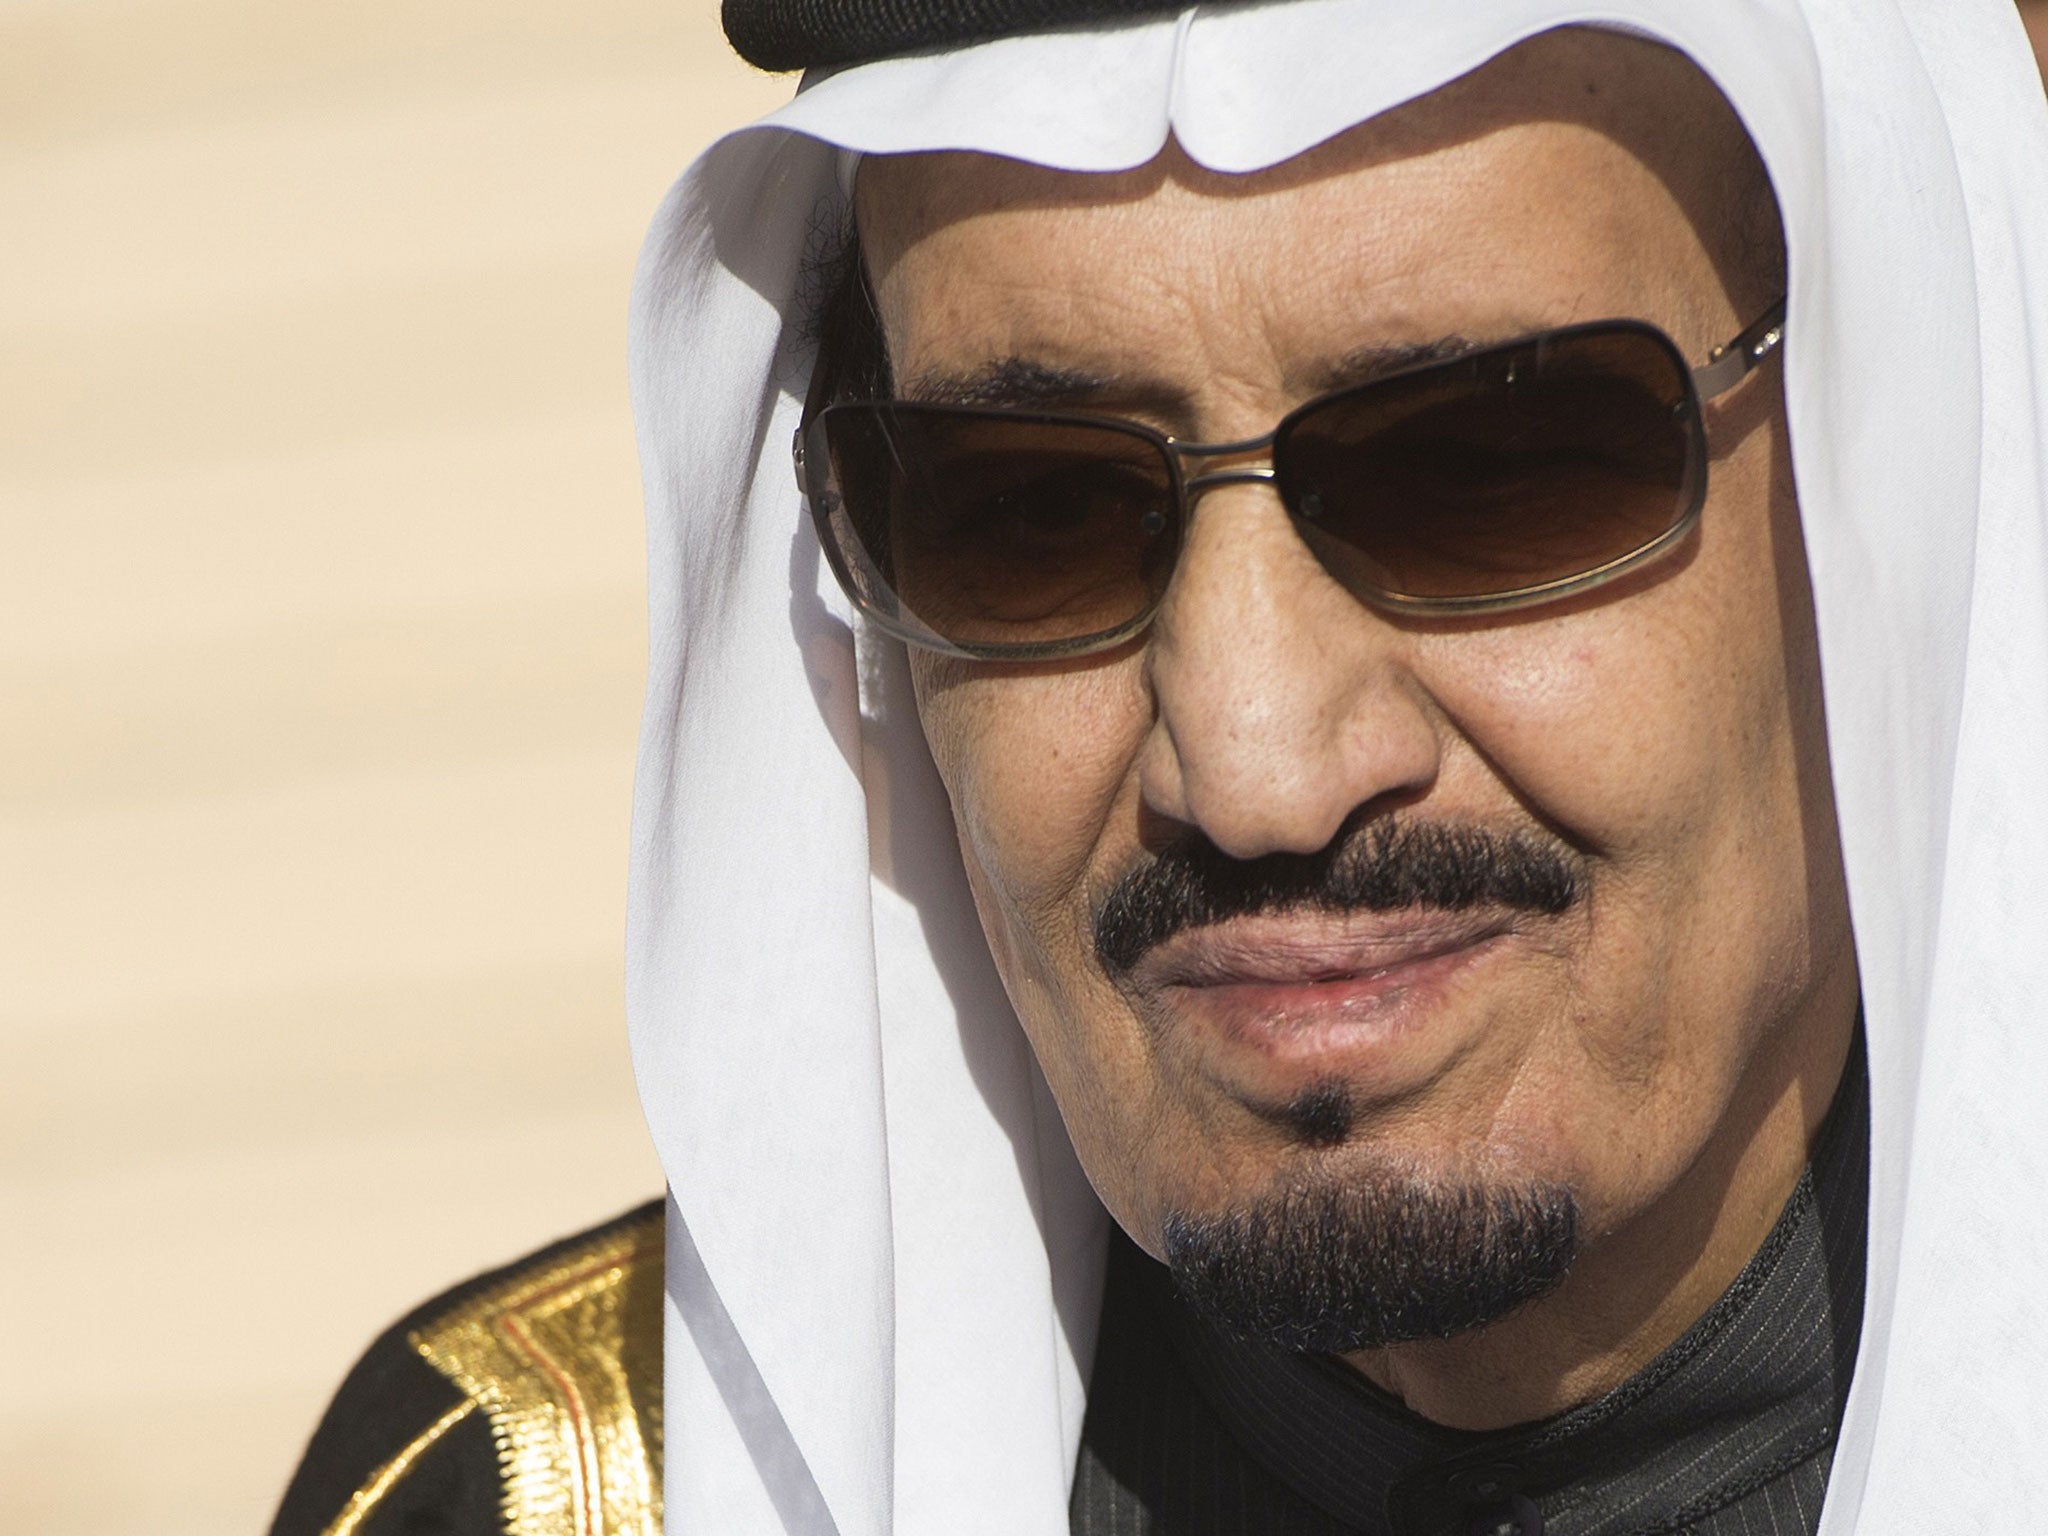 File: There were hopes the new Saudi King Salman would curb the country's rate of executions - the opposite appears to be true